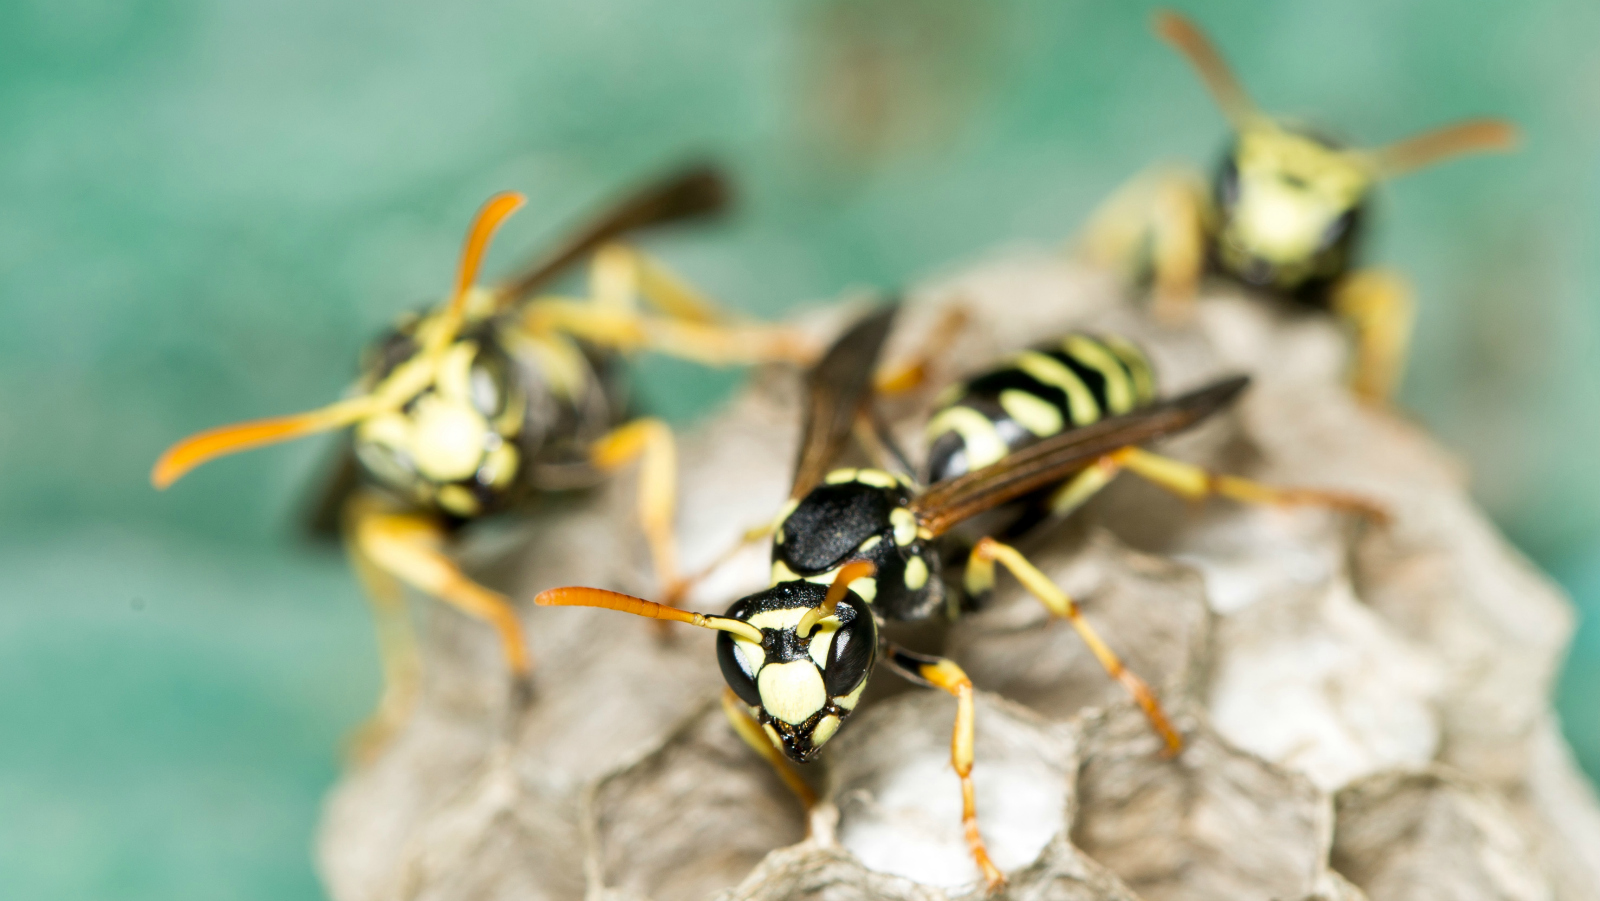 What's the greenest way to get rid of hornets and yellow jackets? | Grist